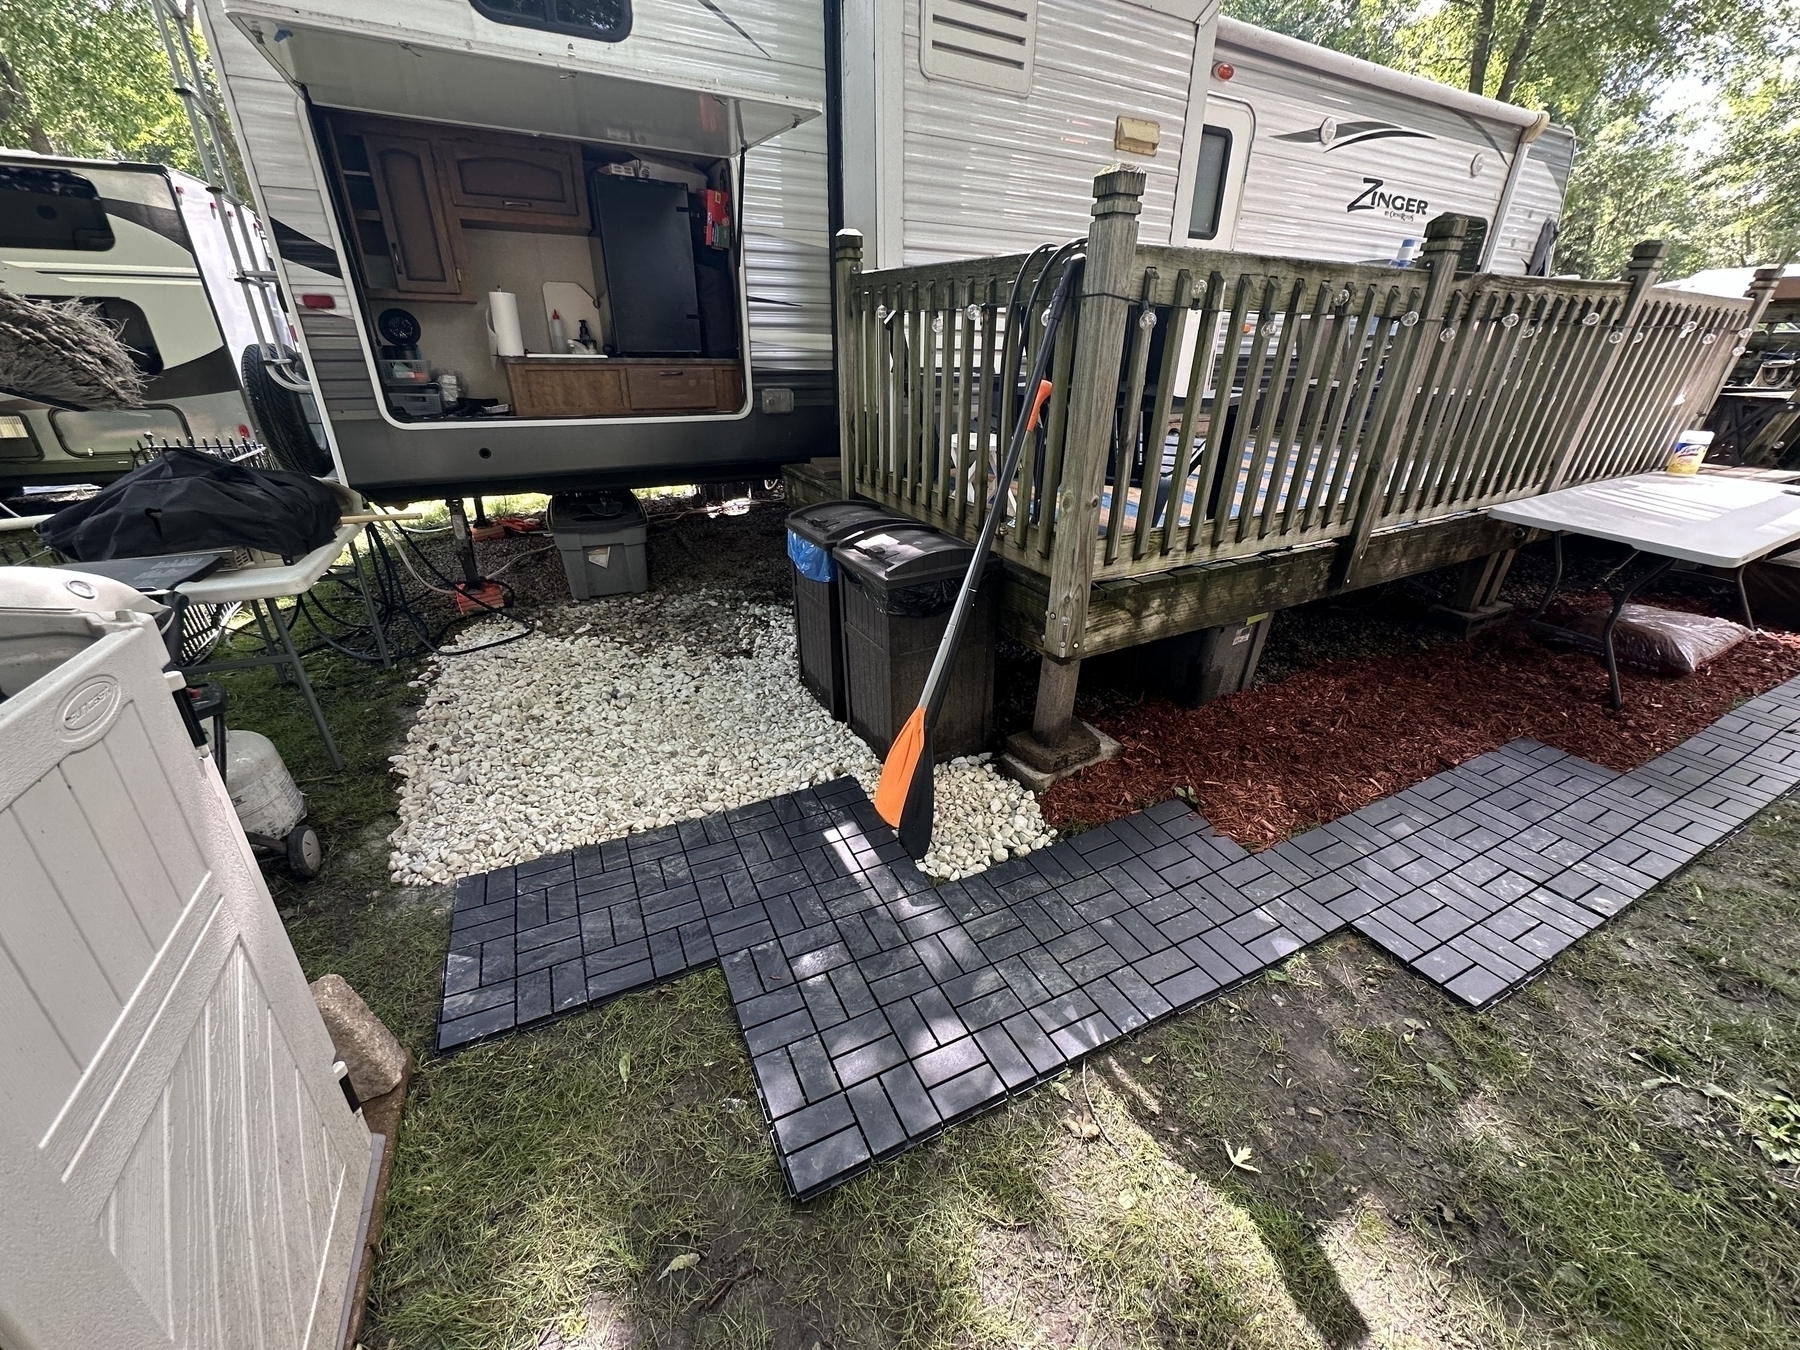 RV with an open side panel reveals a kitchen. A wooden deck fitted to the RV is surrounded by gravel and black tiles. Trees provide shade in the surrounding campground.